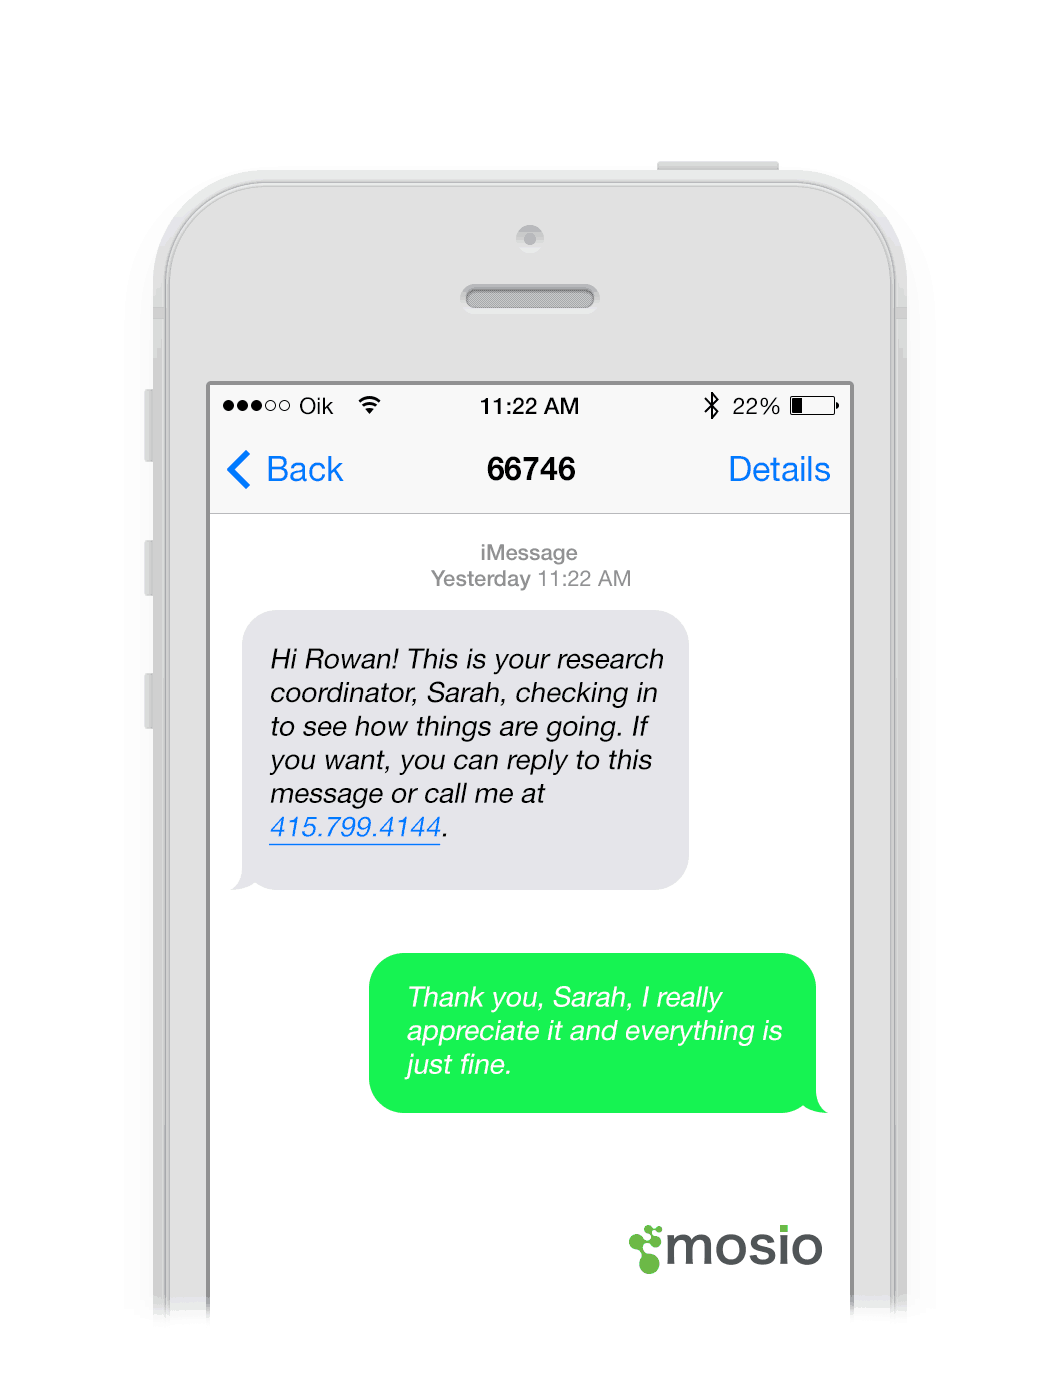 How Text Messaging and the Mobile Web Improve Academic Research – Public Health, Clinical Trials, etc.